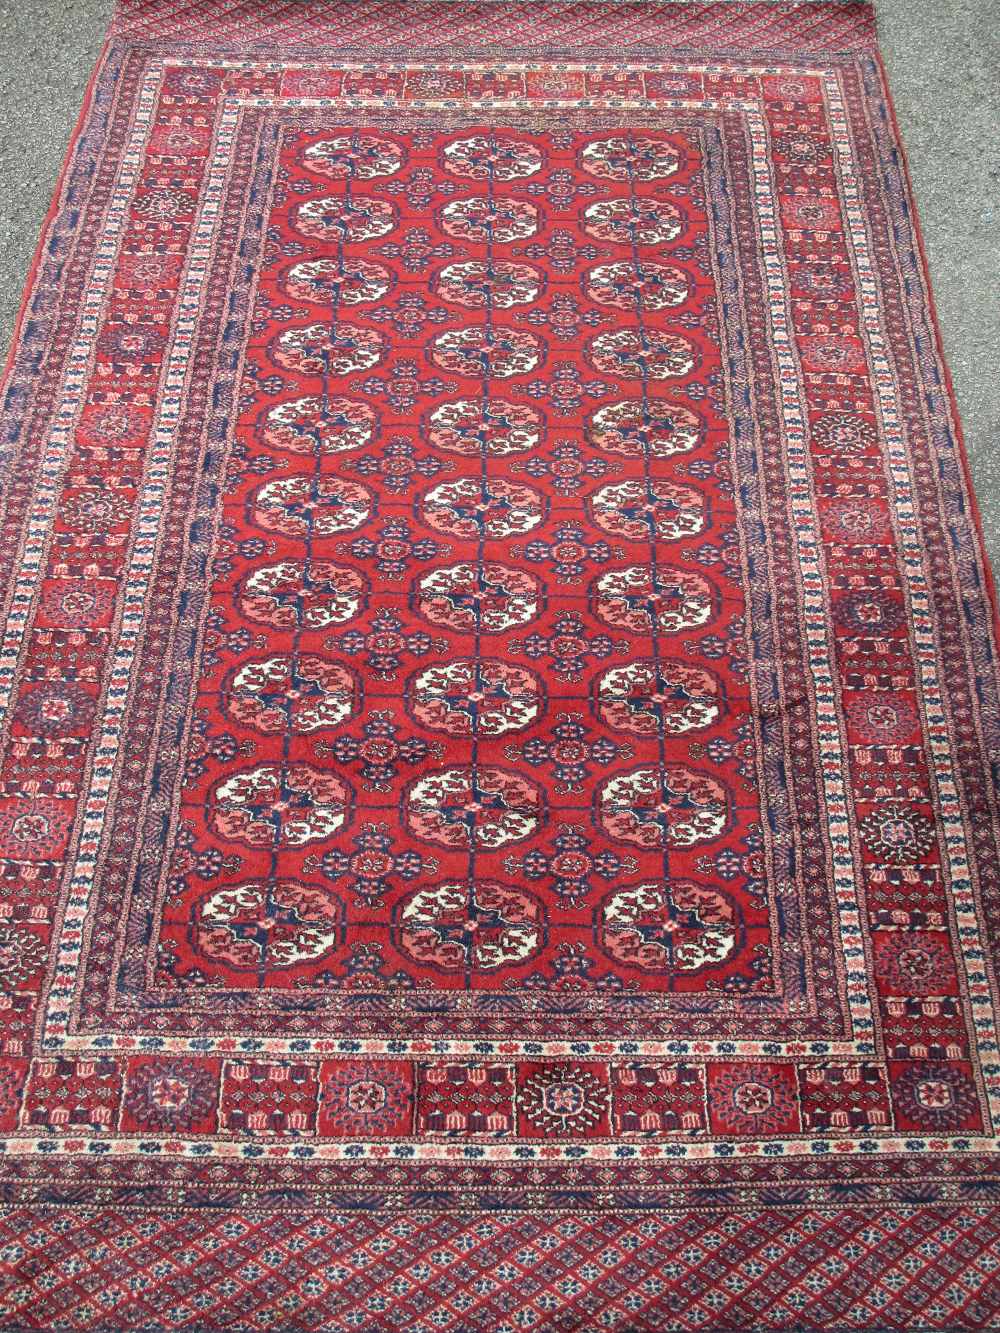 PERSIAN TYPE WOOLLEN RUG, red ground with a block pattern repeat centre and multi-bordered edge, 195